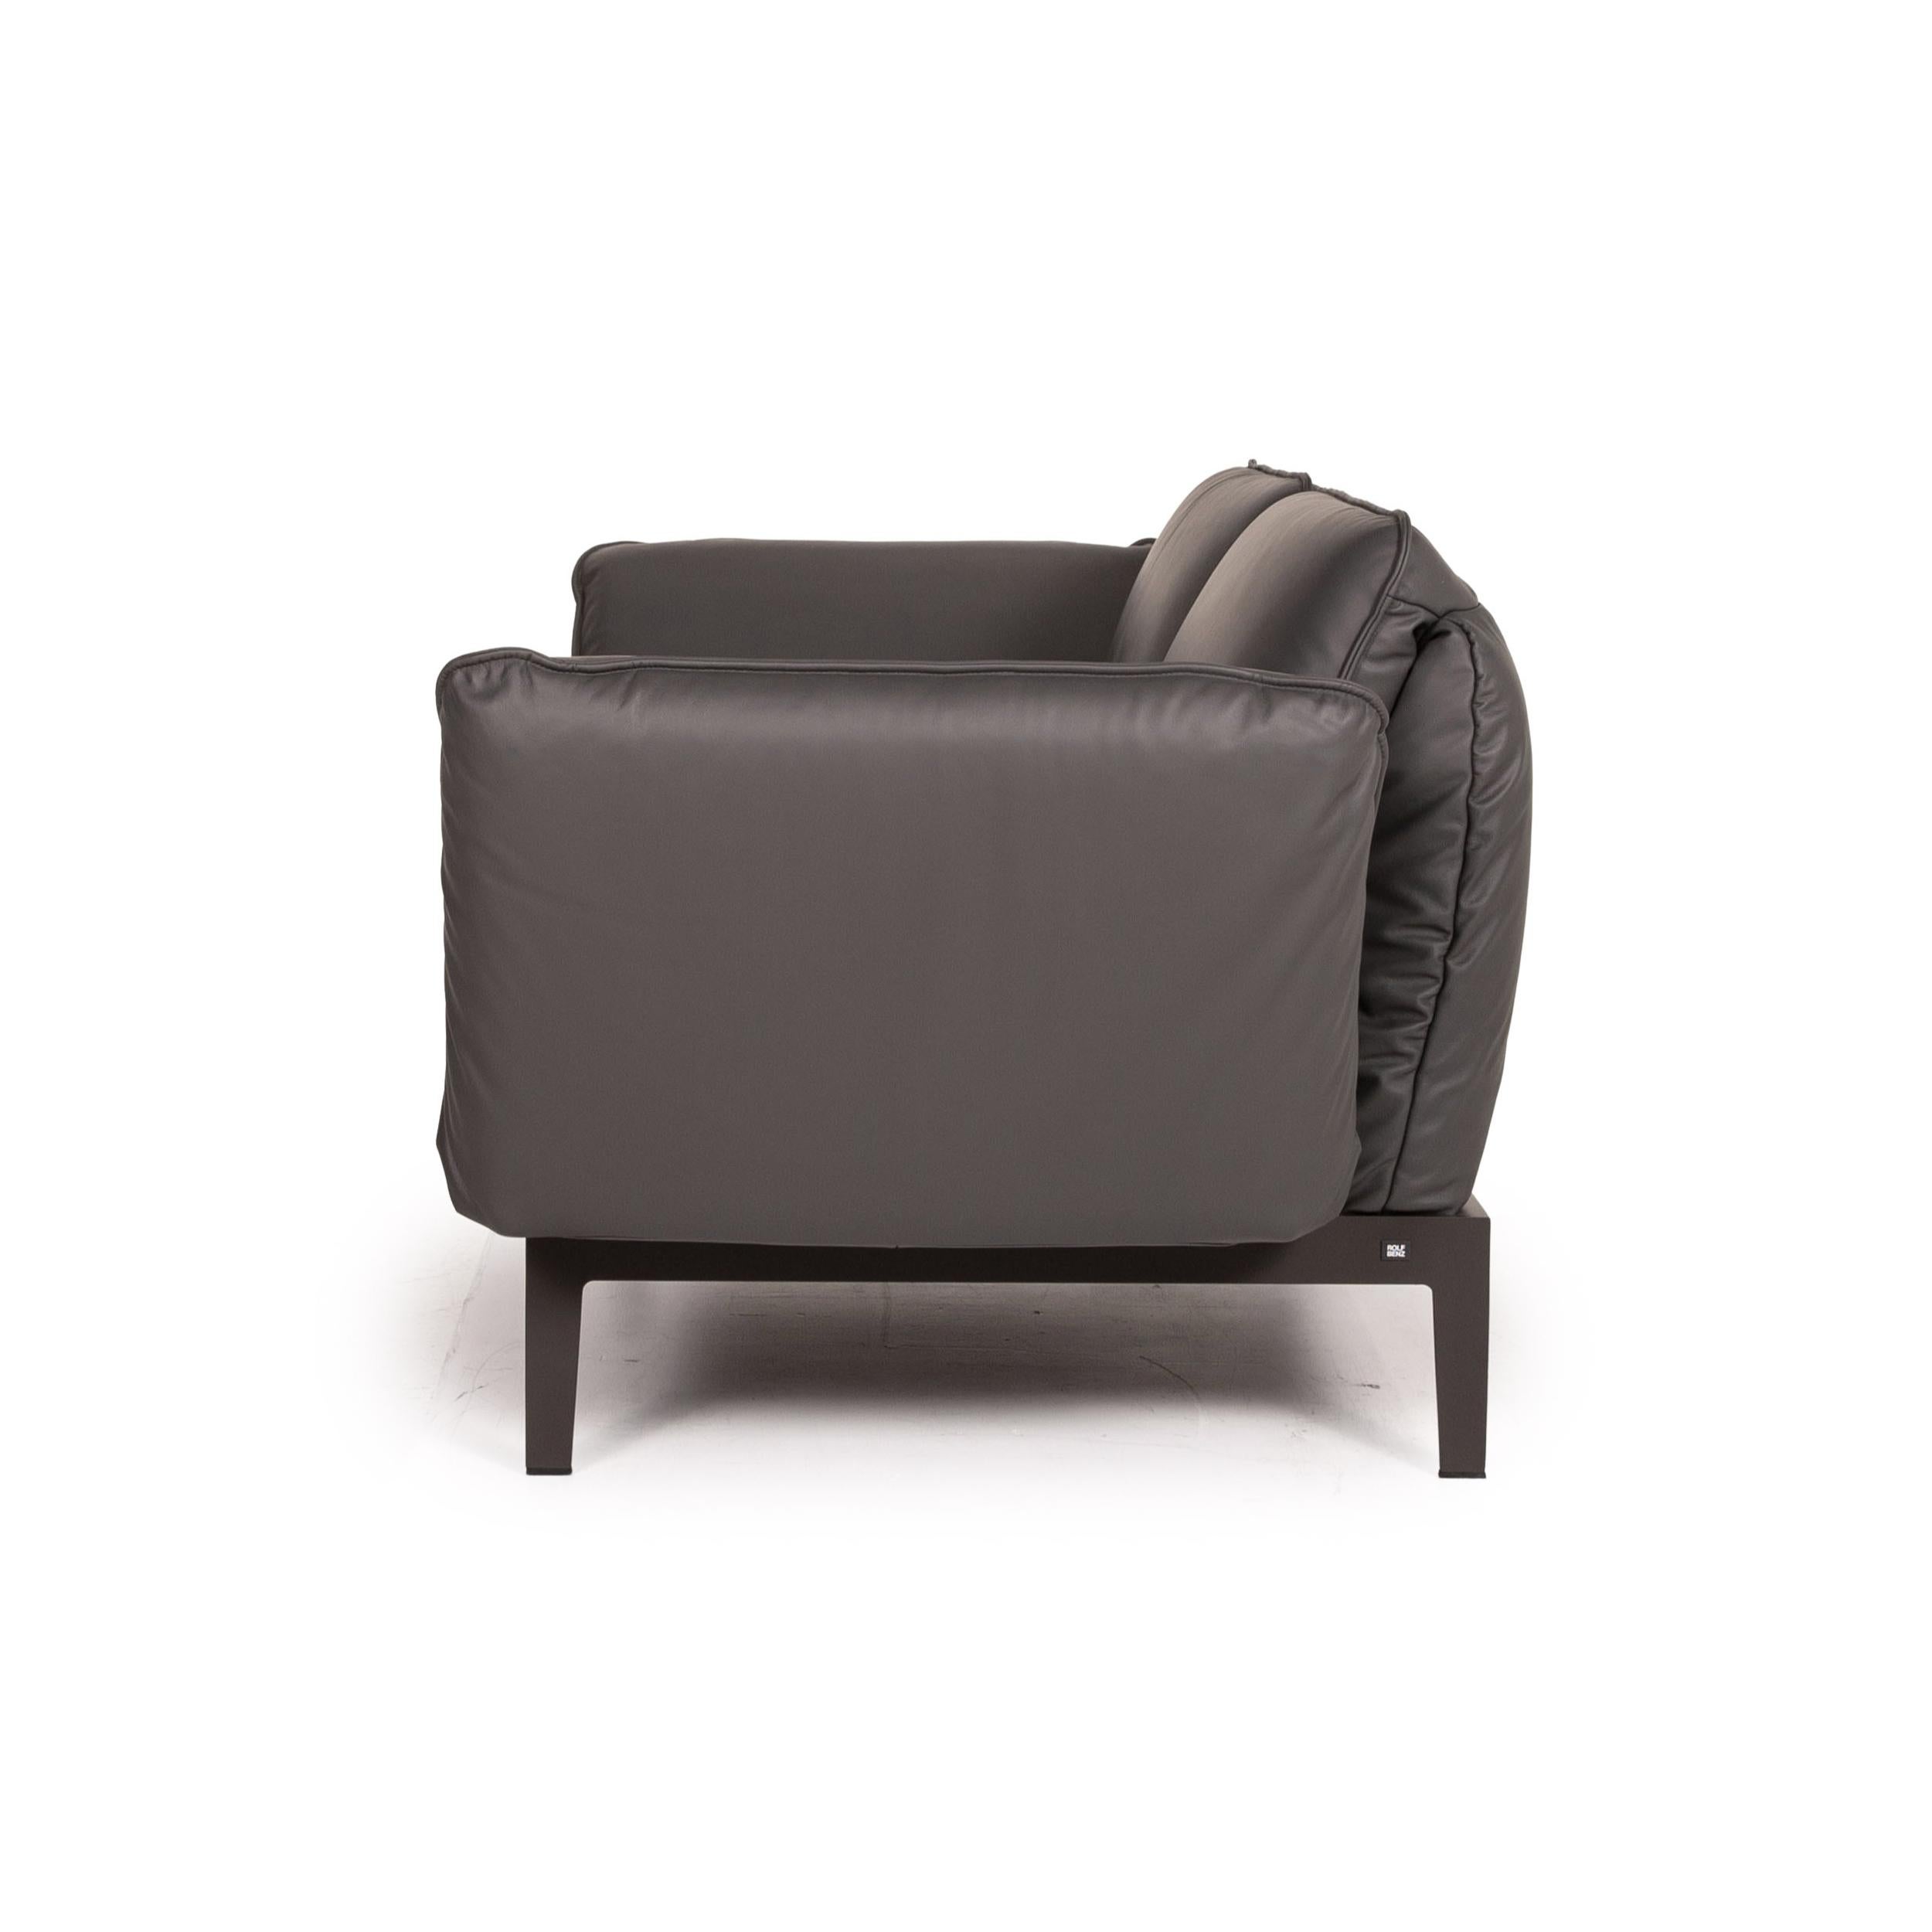 Rolf Benz Mera Leather Sofa Gray Dark Gray Two-Seater Function Relax Function 3